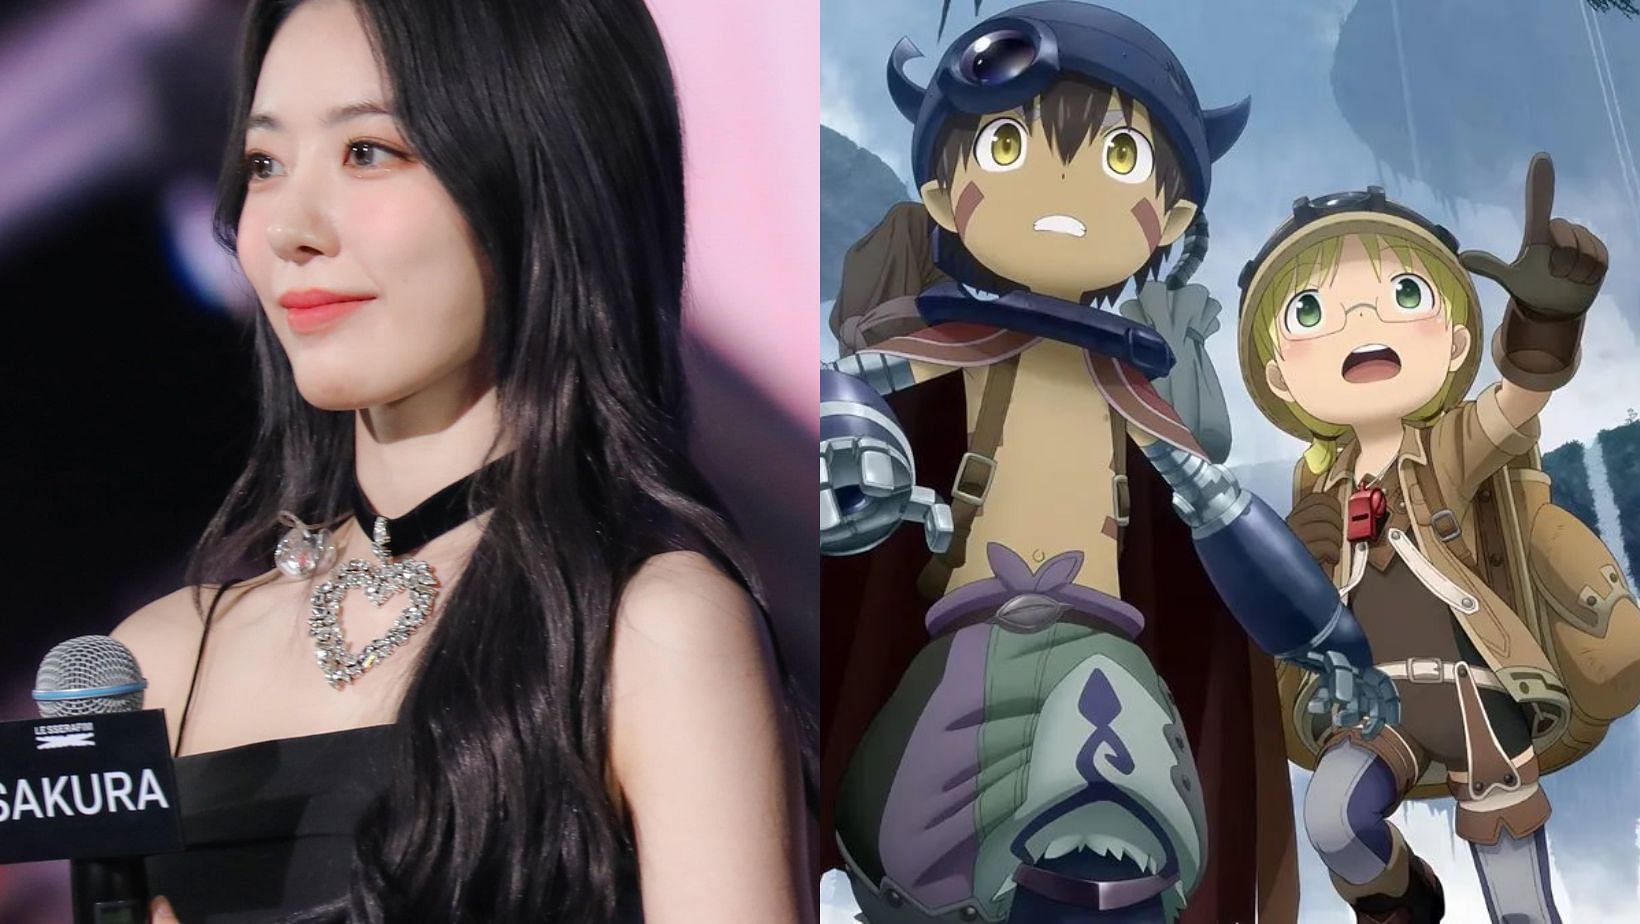 K-Pop fans try cancelling singer Woozi for watching Made in Abyss